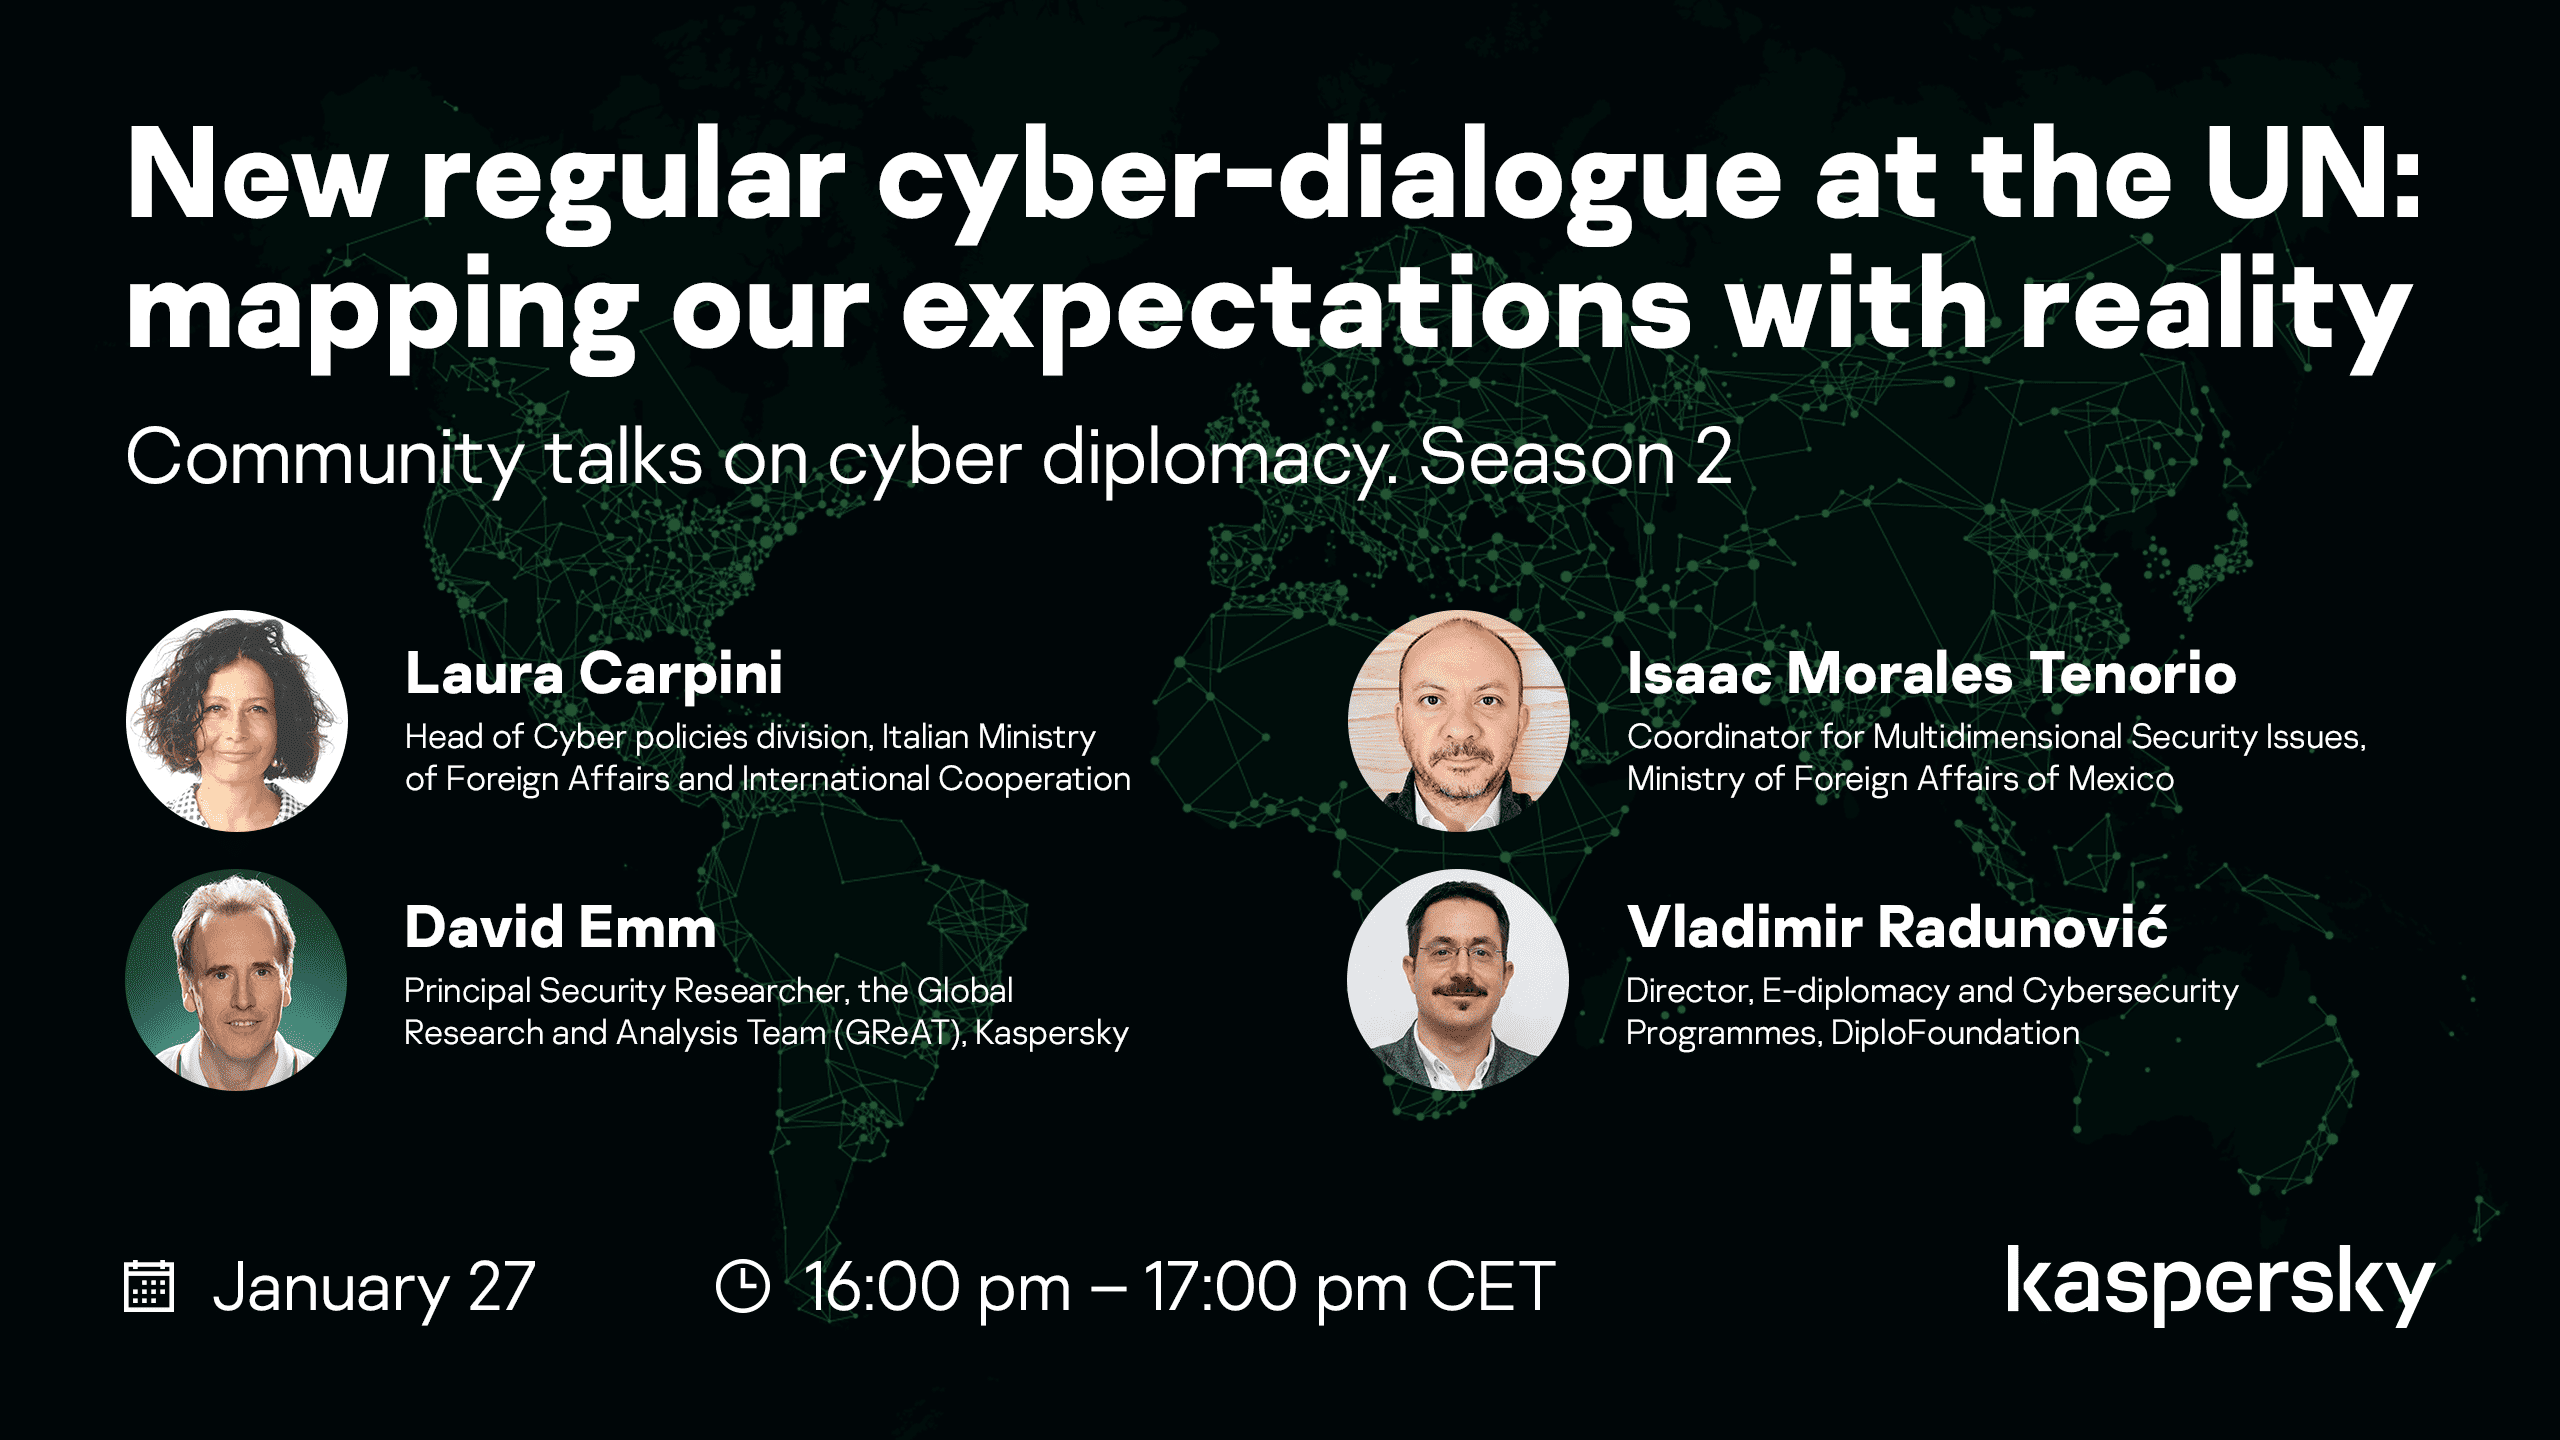 https://www.kaspersky.com/content/en-global/images/repository/isc/2022/new-community-talks-on-cyber-diplomacy-1.png